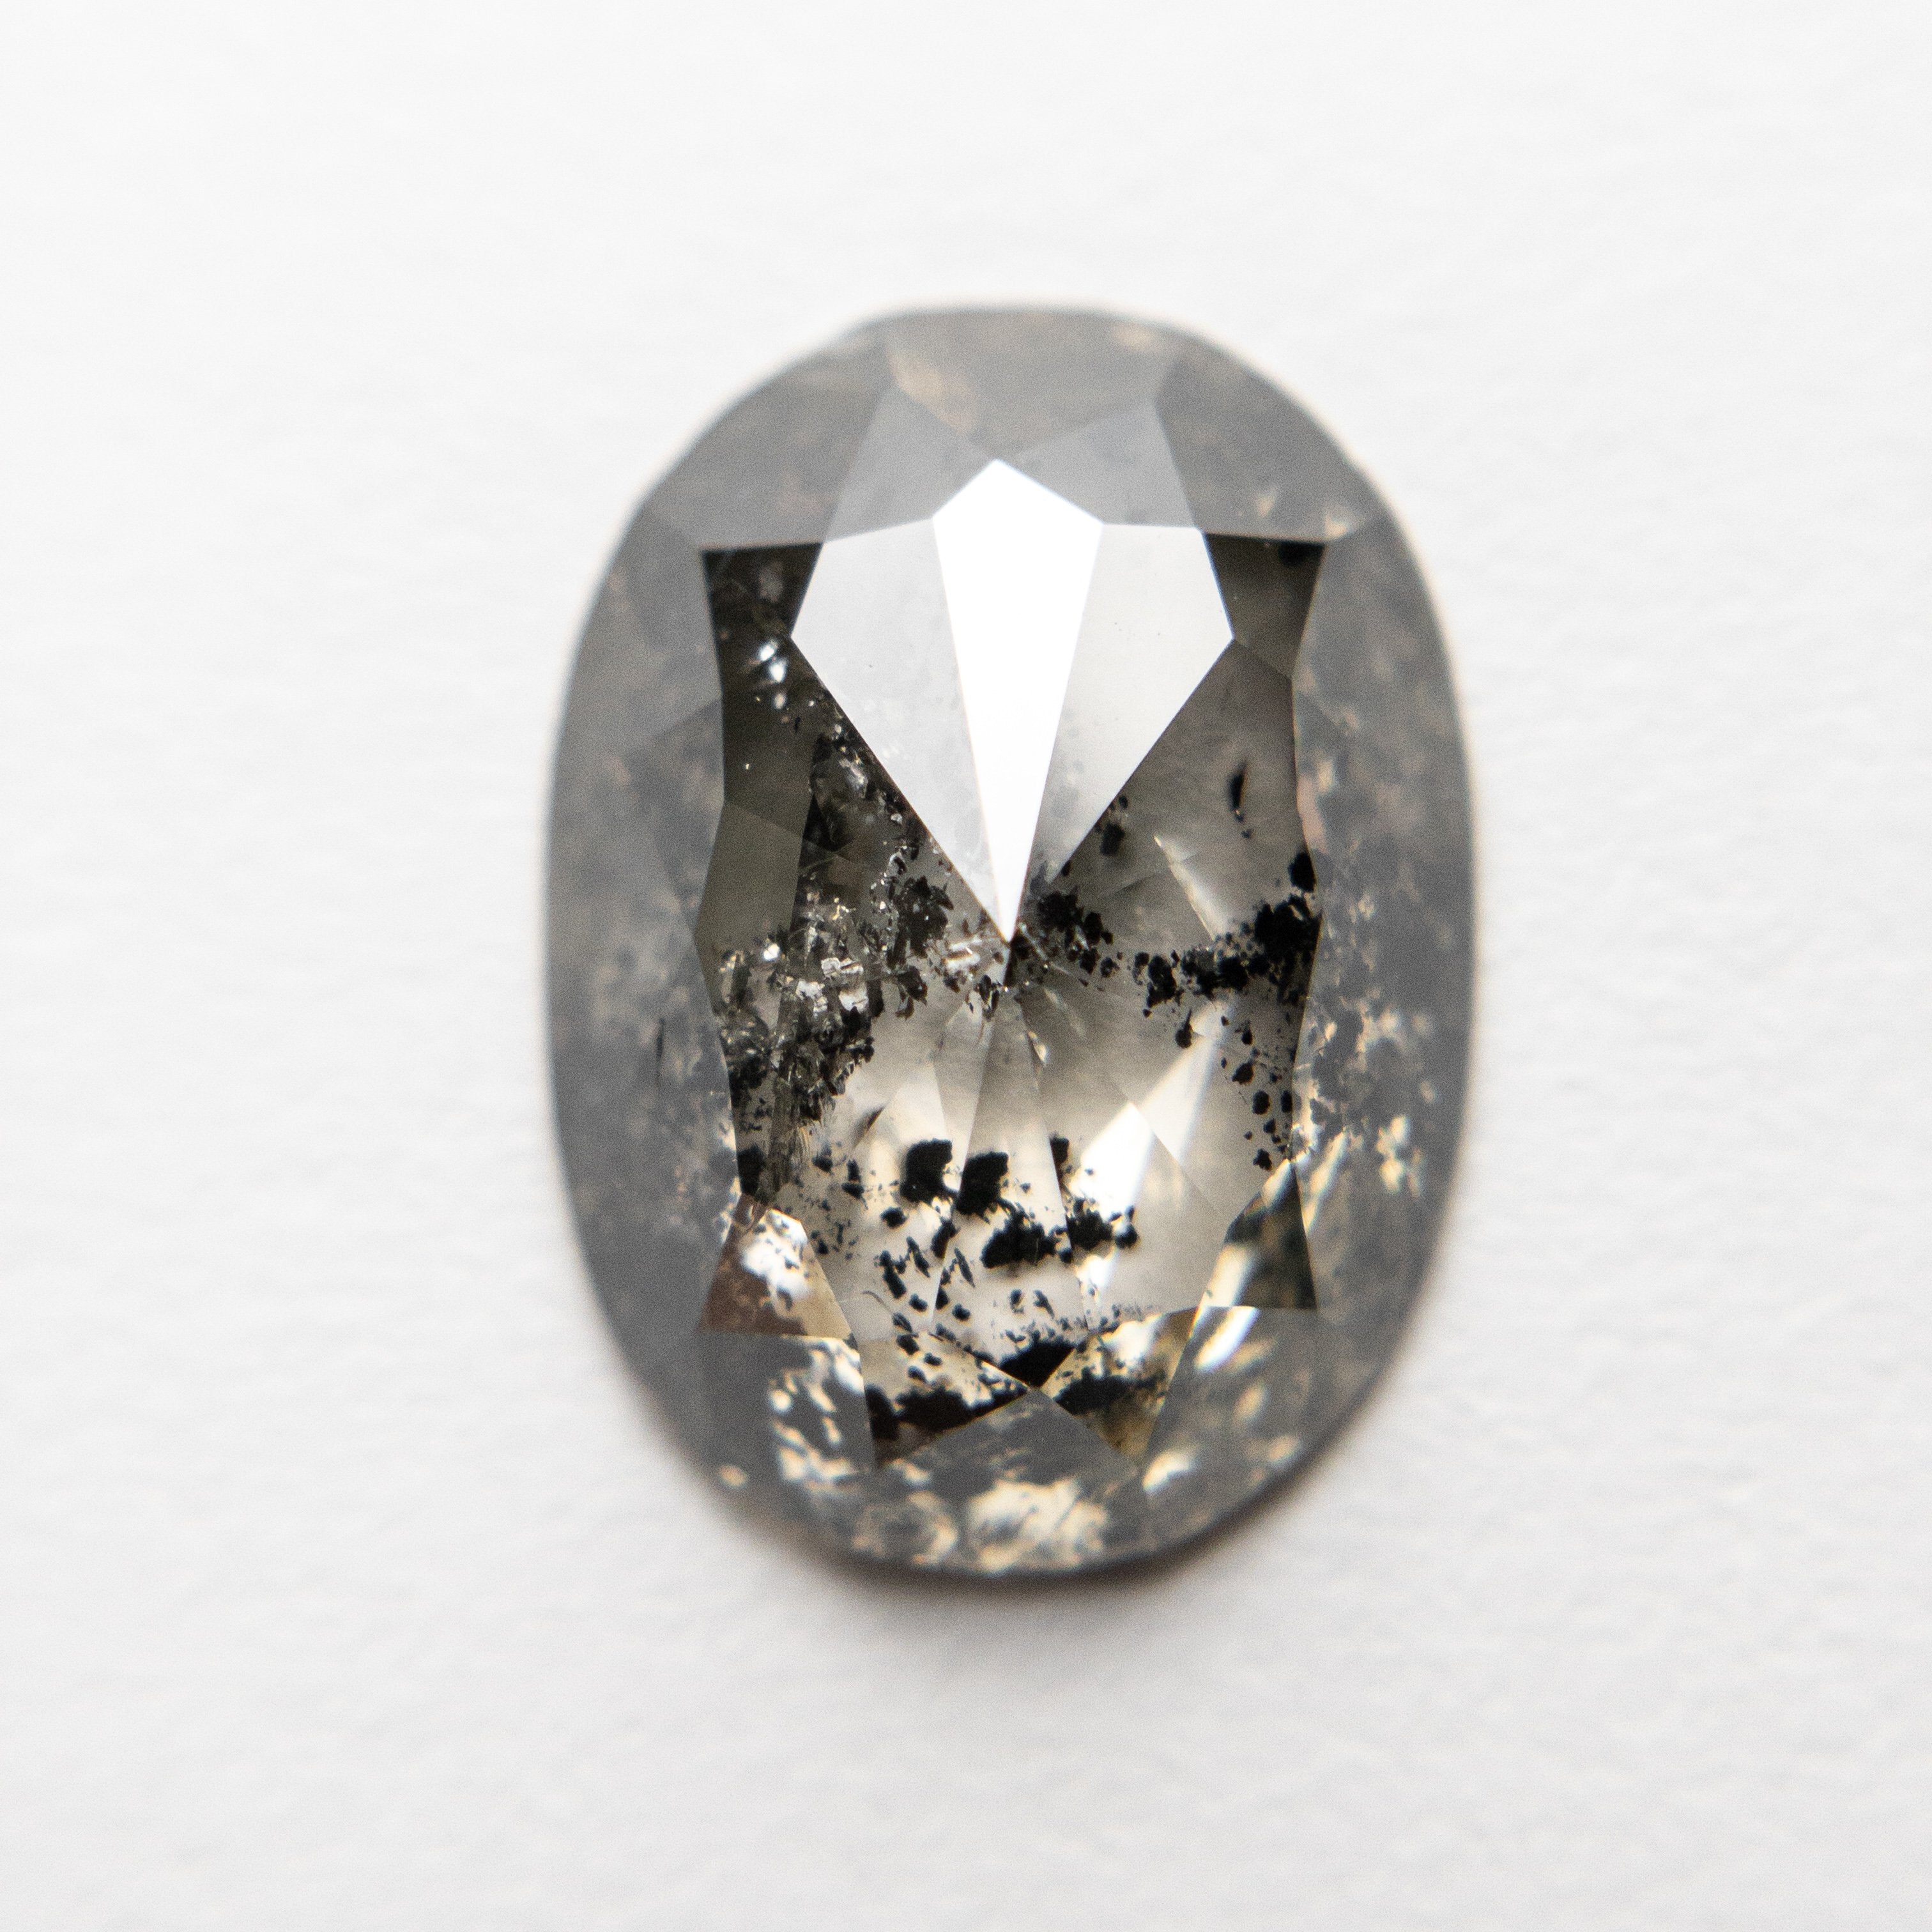 3.40ct 12.49x9.20x3.91mm Oval Rosecut 18419-02 HOLD D1873